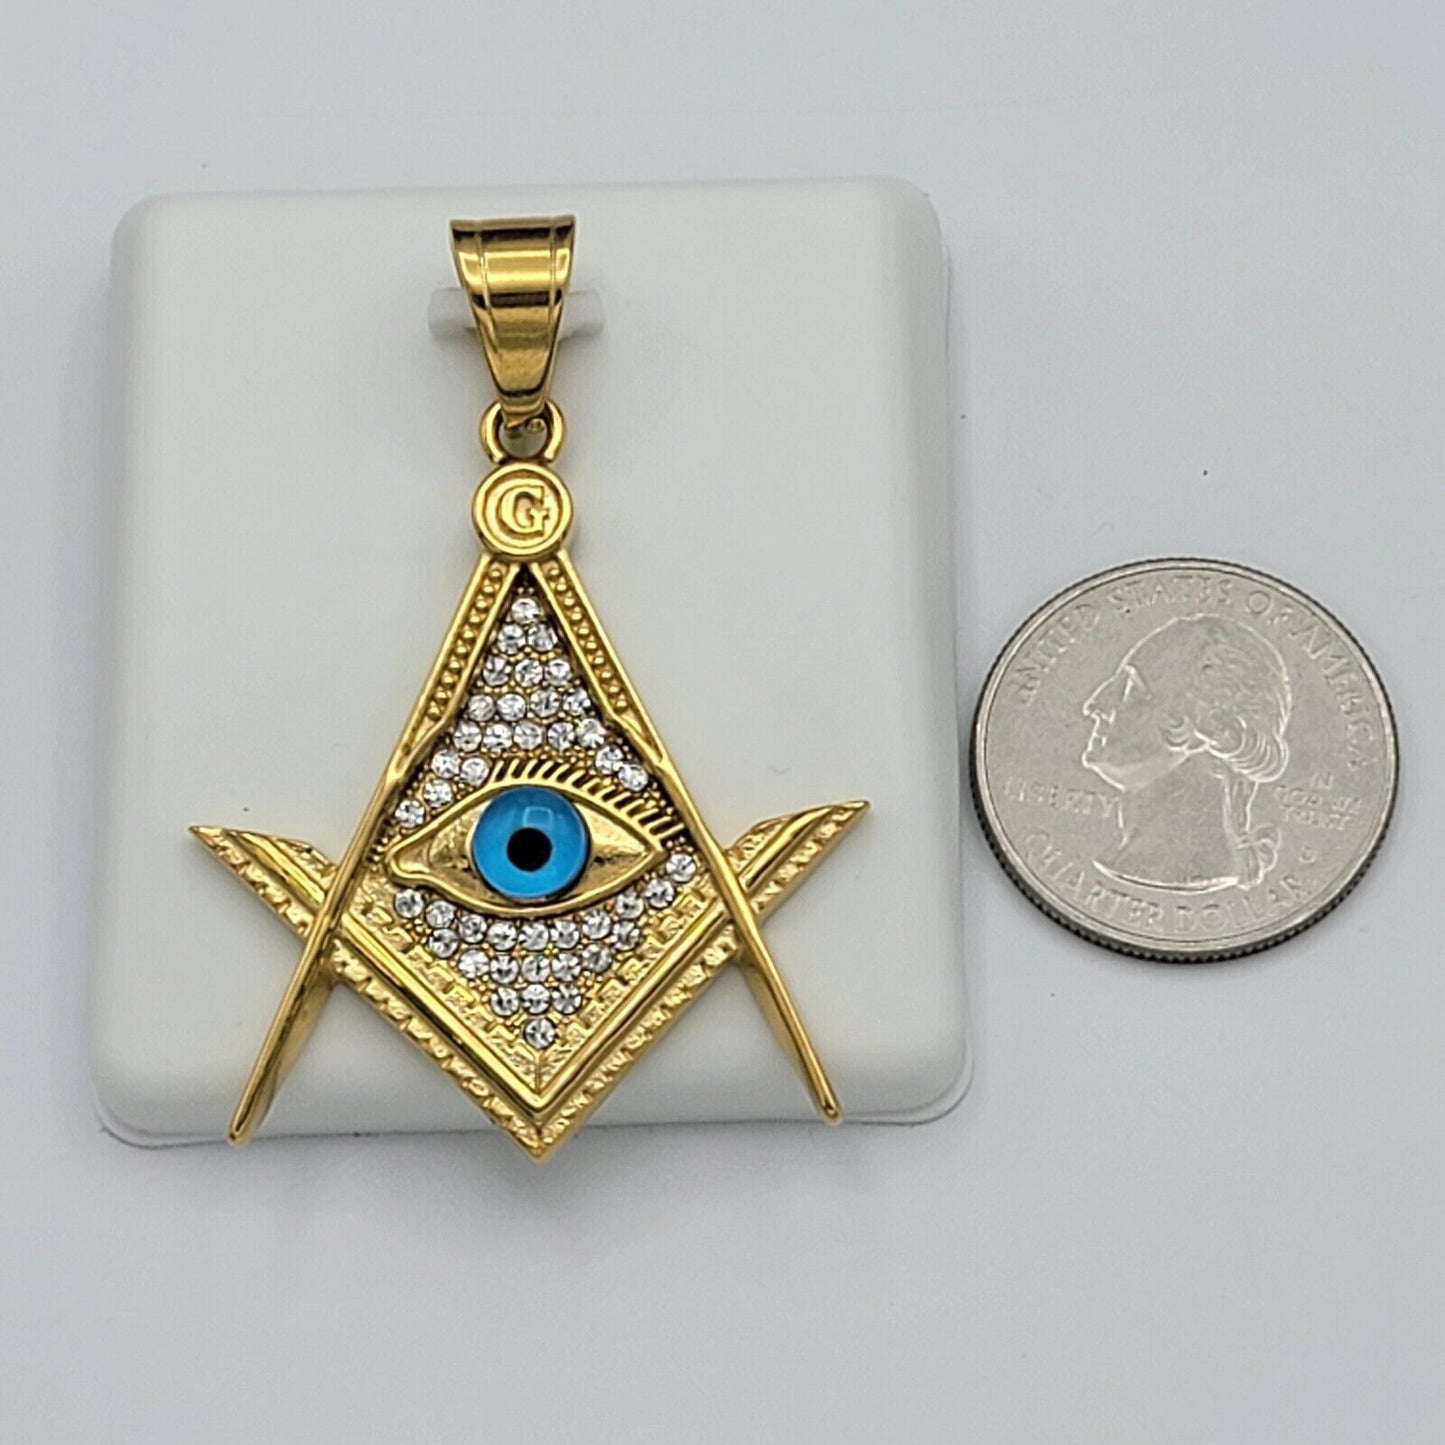 Necklaces - 24K Gold Plated. Masonic Square and Compasses Eye of Providence Pendant & Chain.